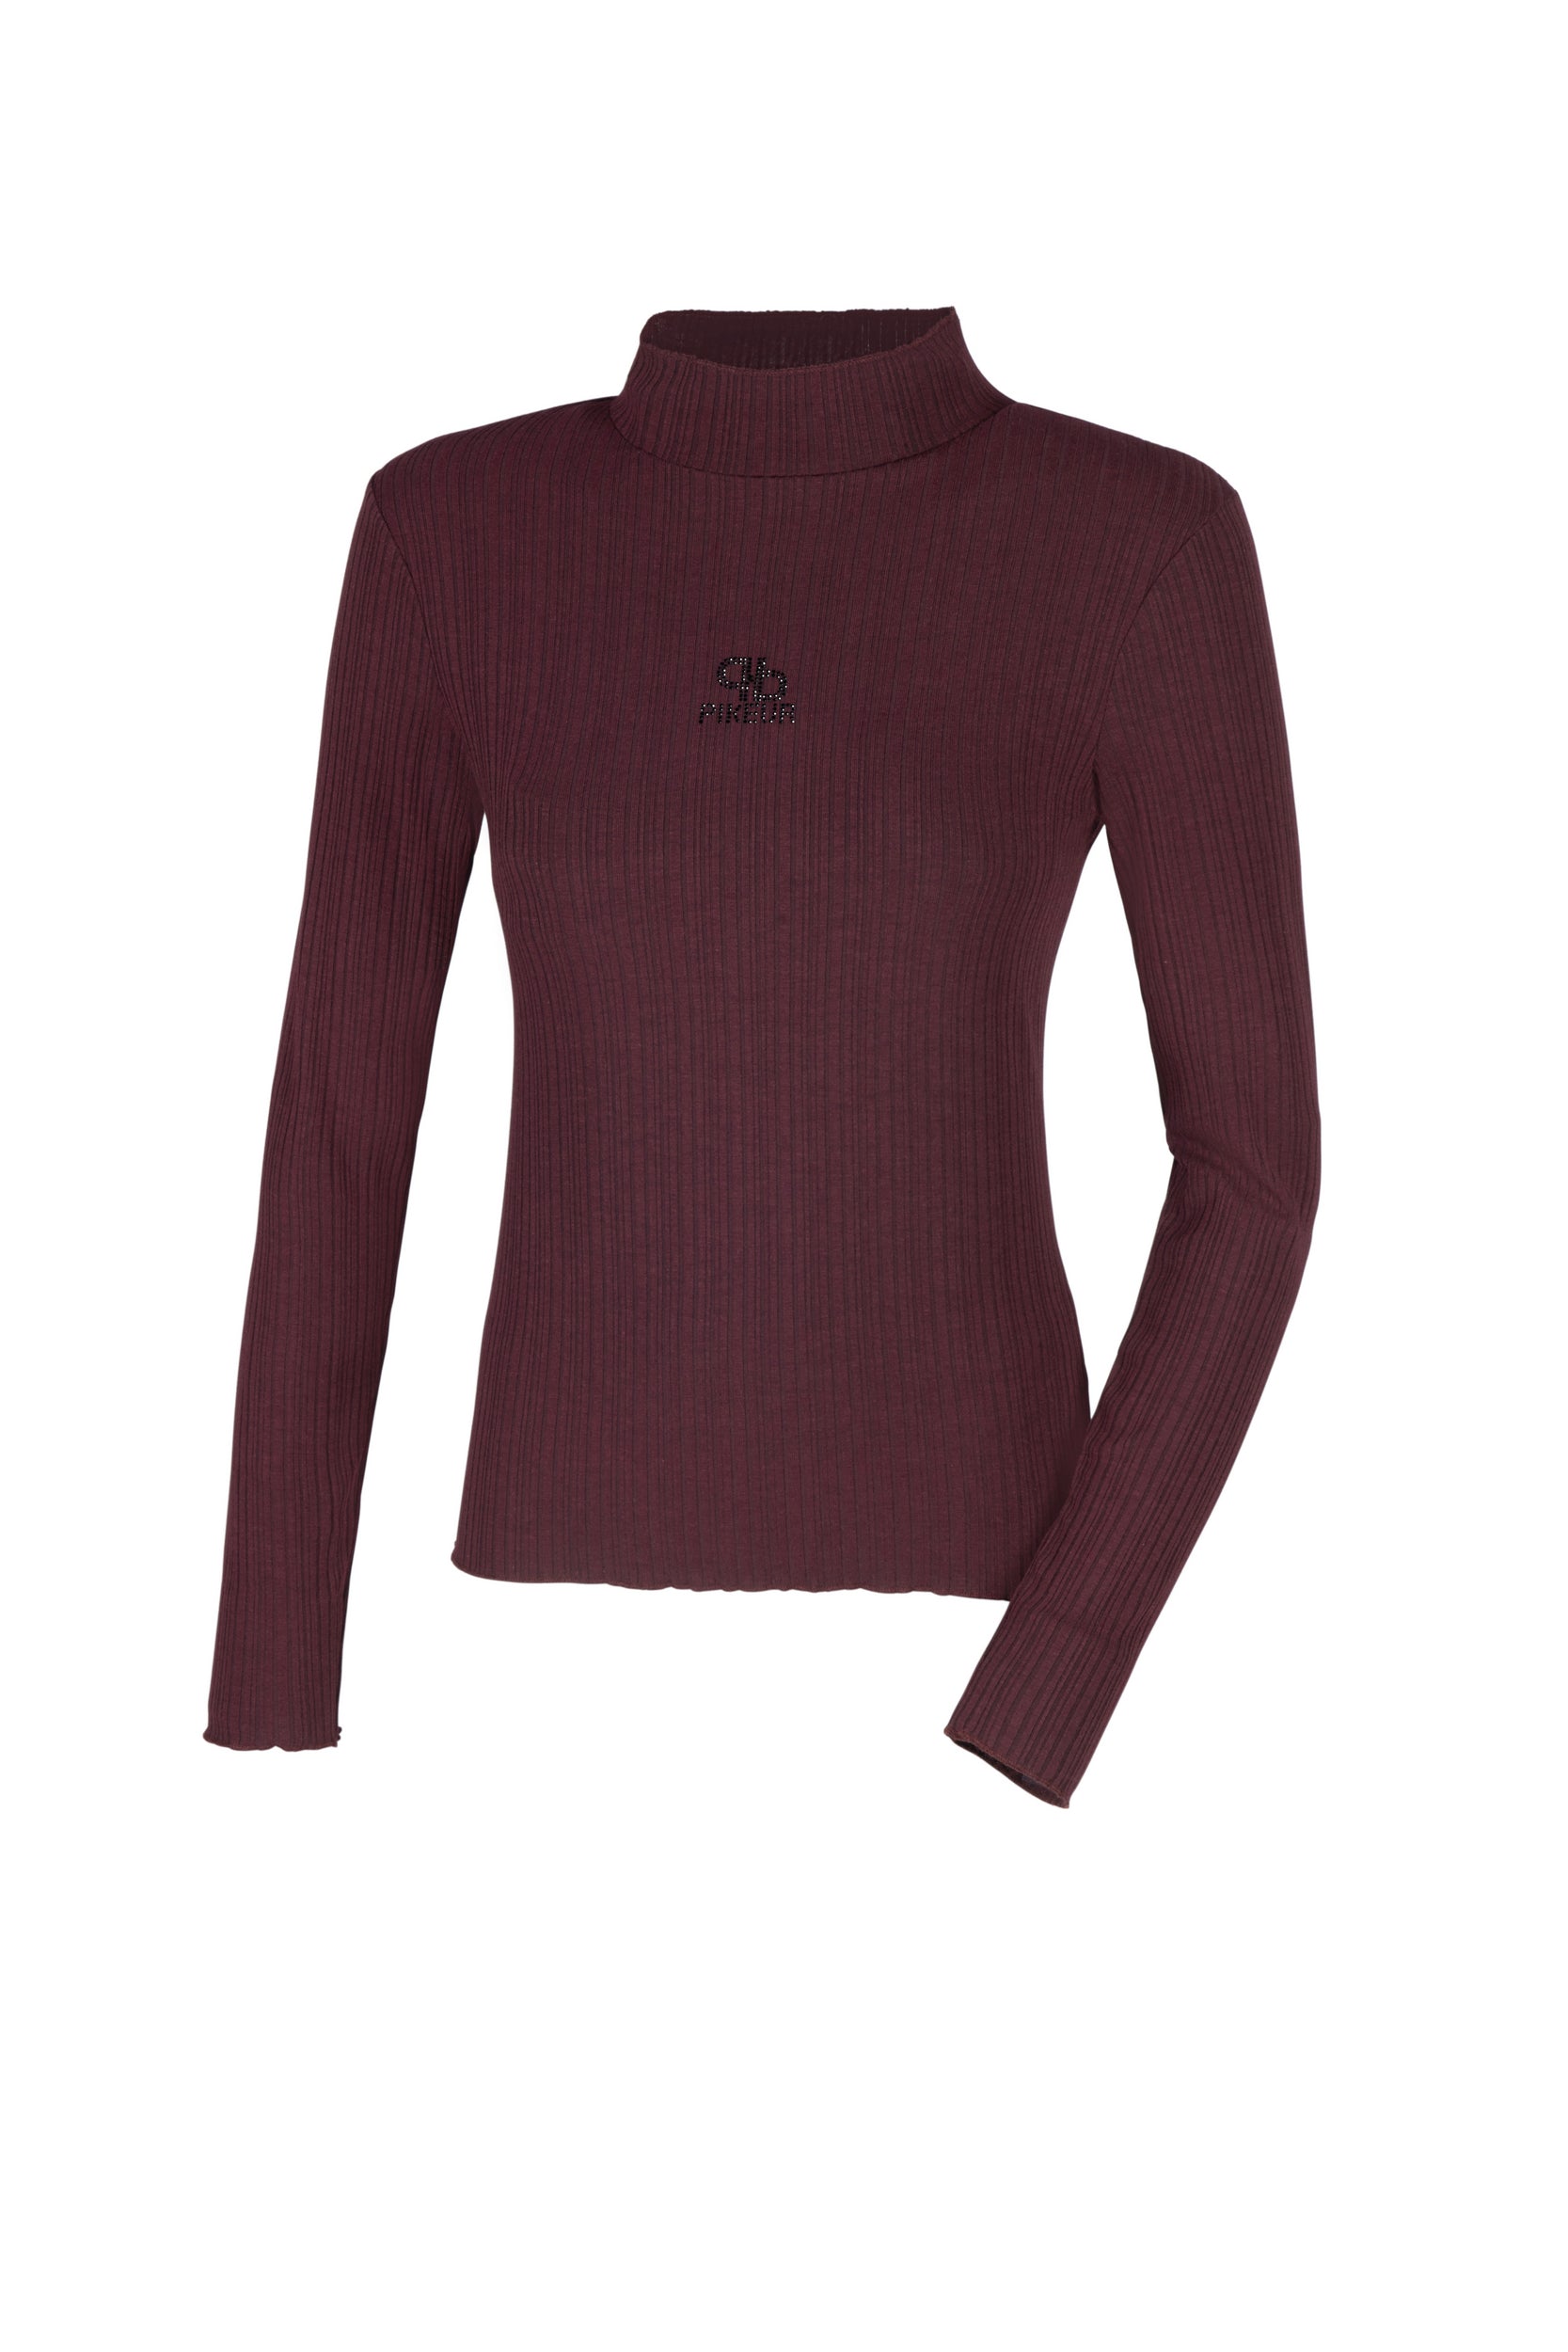 Pikeur selection roll neck top in Mulberry